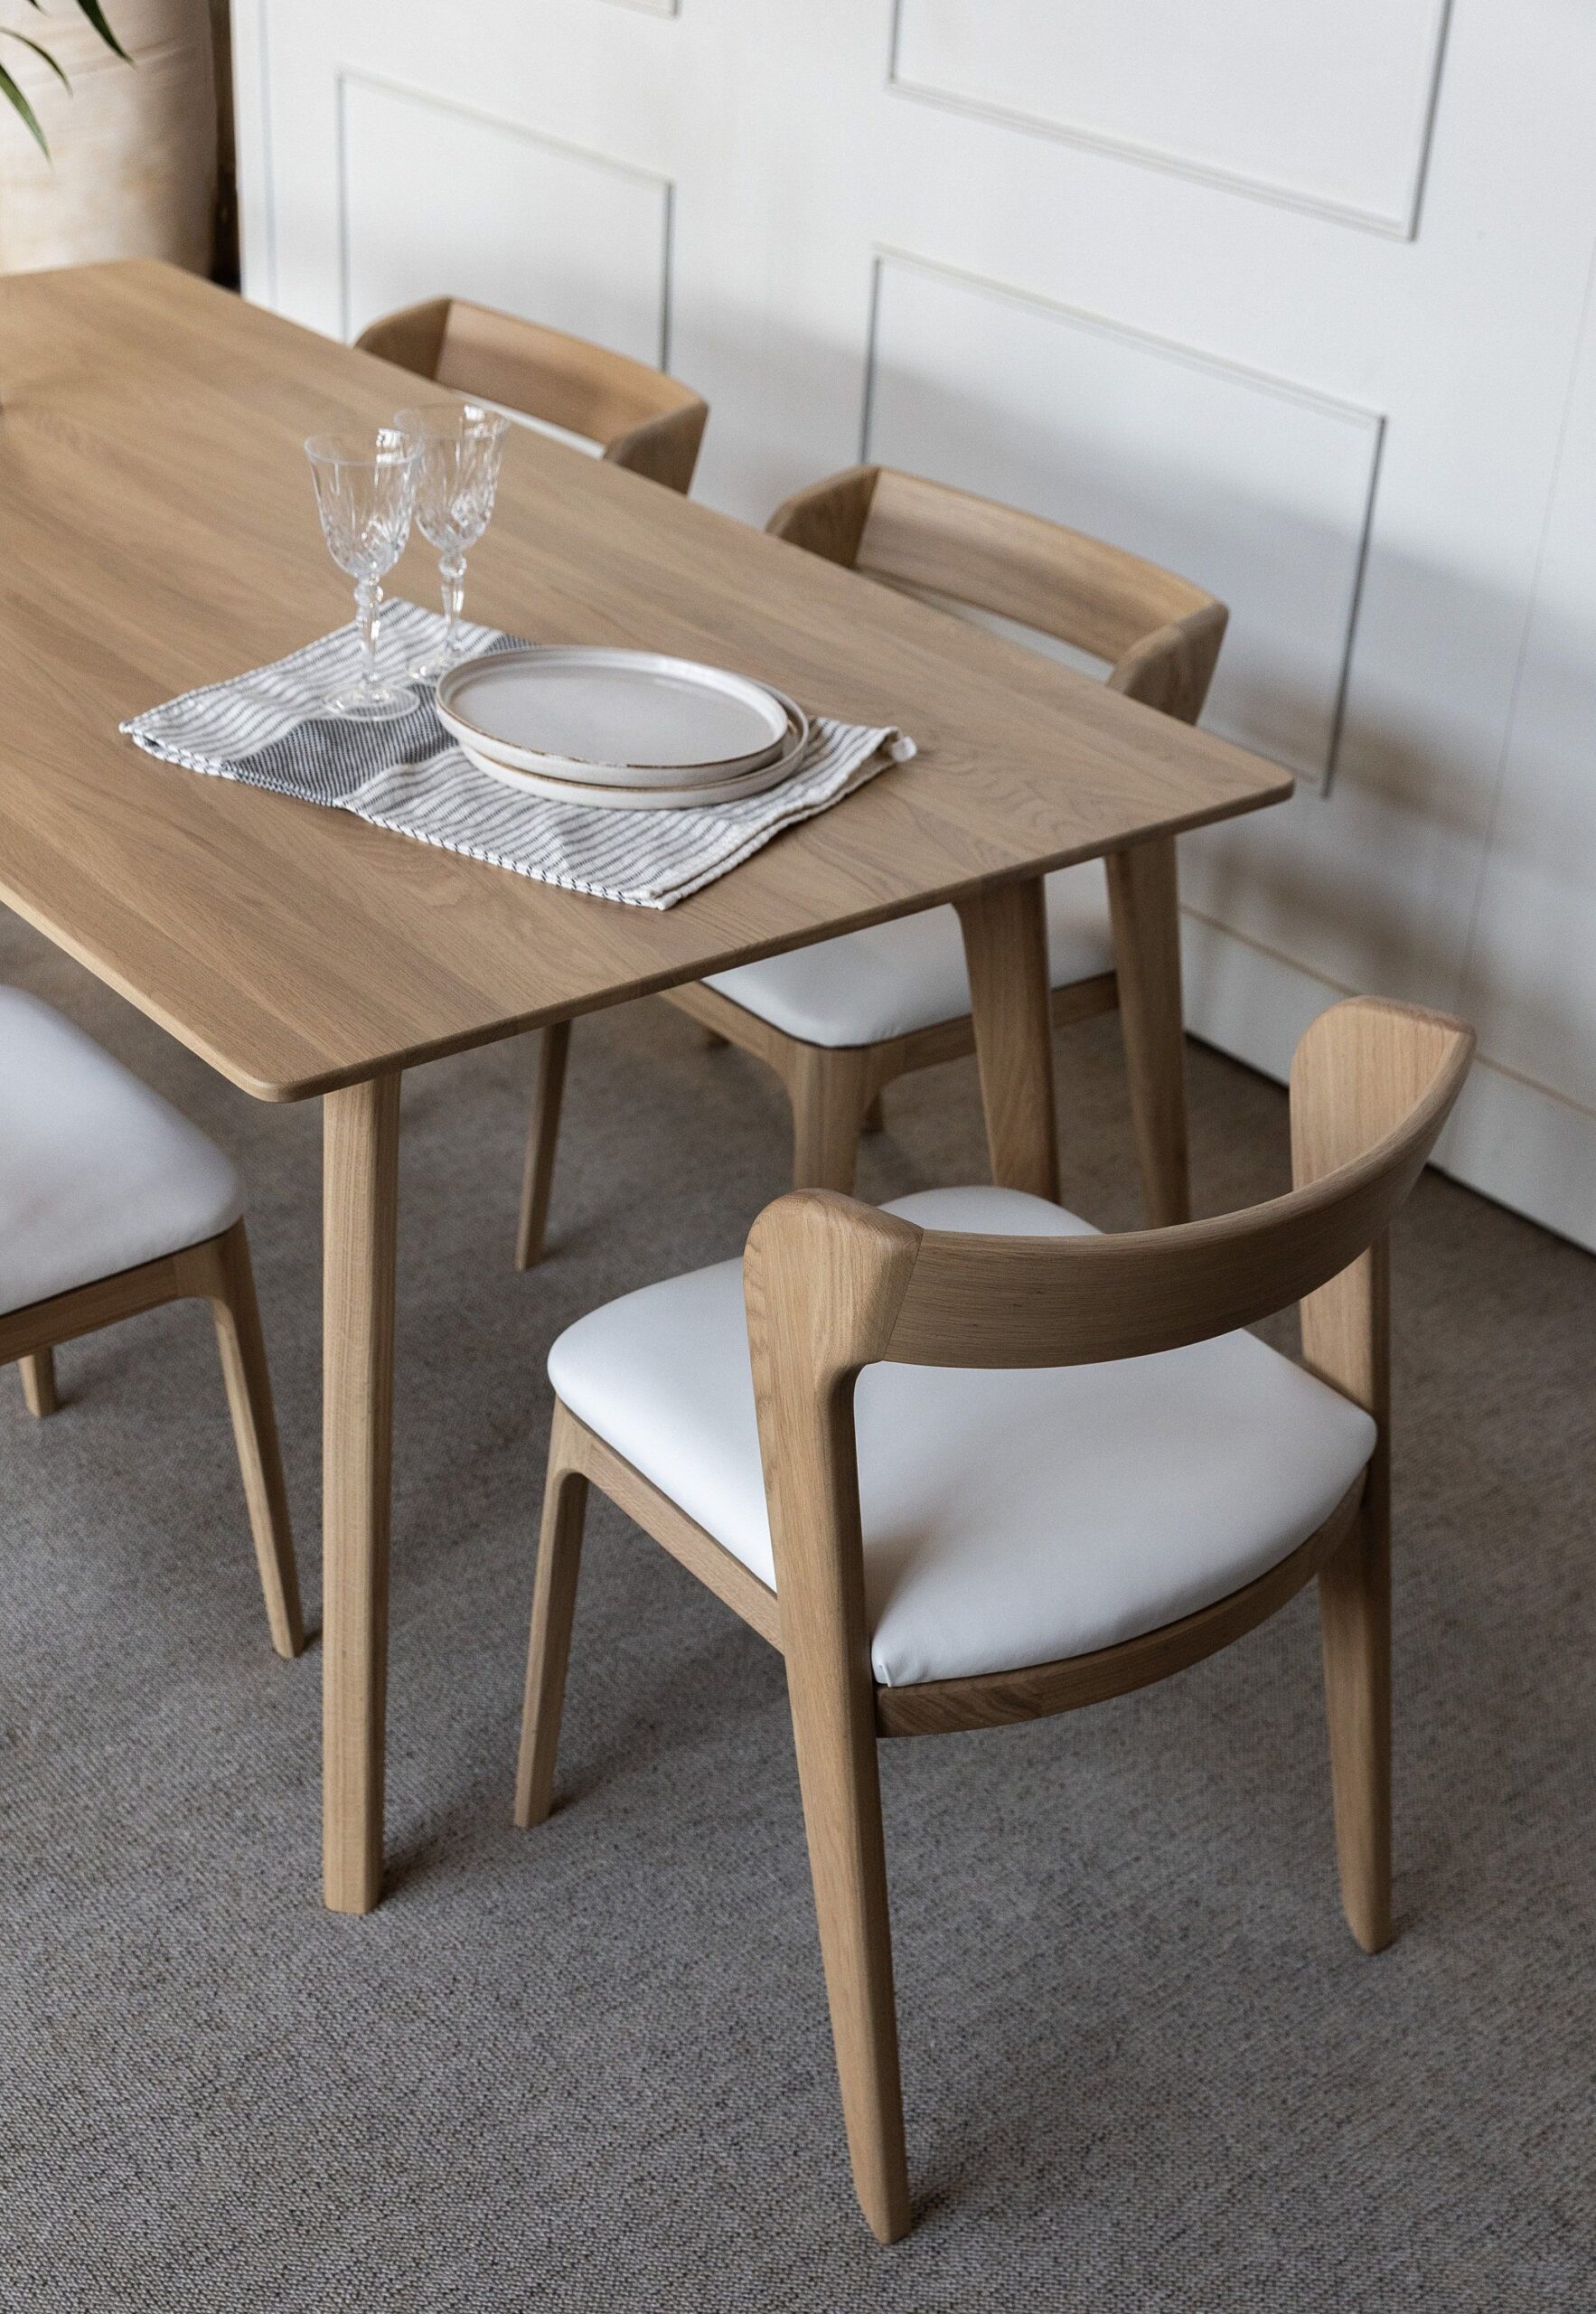 Elevate Your Dining Experience with Stunning Kitchen and Dining Room Table Sets